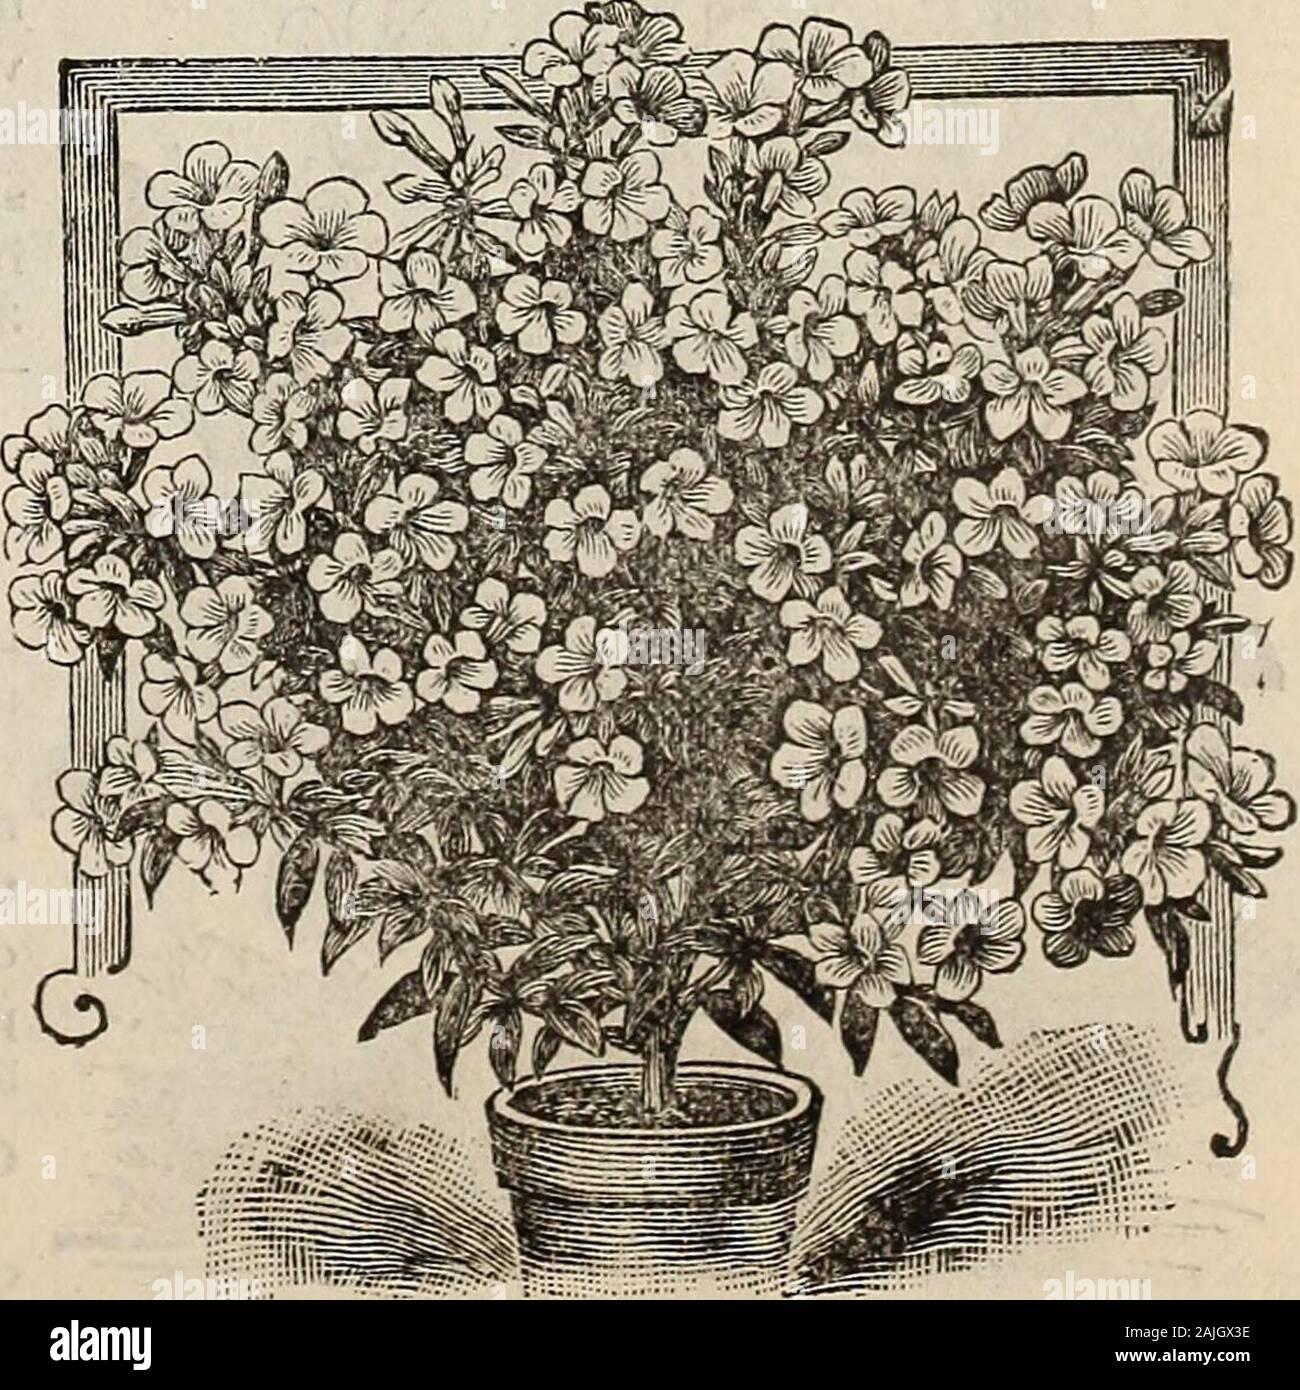 New floral guide : autumn 1899 . tpaid. NEW CUPHEA, MTTIiE PET.—An elegant window plant; growsonly eight or ten inches high; almost as round as a ball; fine, deepgreen leaves, and dotted all over with pretty rosy-pink flowers;blooms all the time. 10 cts. NEW HEMOTROPE. Jersey Beauty.—Rich purple flowers, fineWinter bloomer, for living room or window gardeu. 10c. LEMON VERBENA.—Highly prized for the spicy and deliciousfragrance of its leaves, entirely different from anything else ; nicefor pots and bedding. 10 cts. each, postpaid. PAKLiOR I^T.—A lovely climber for house or window; quick grower, Stock Photo